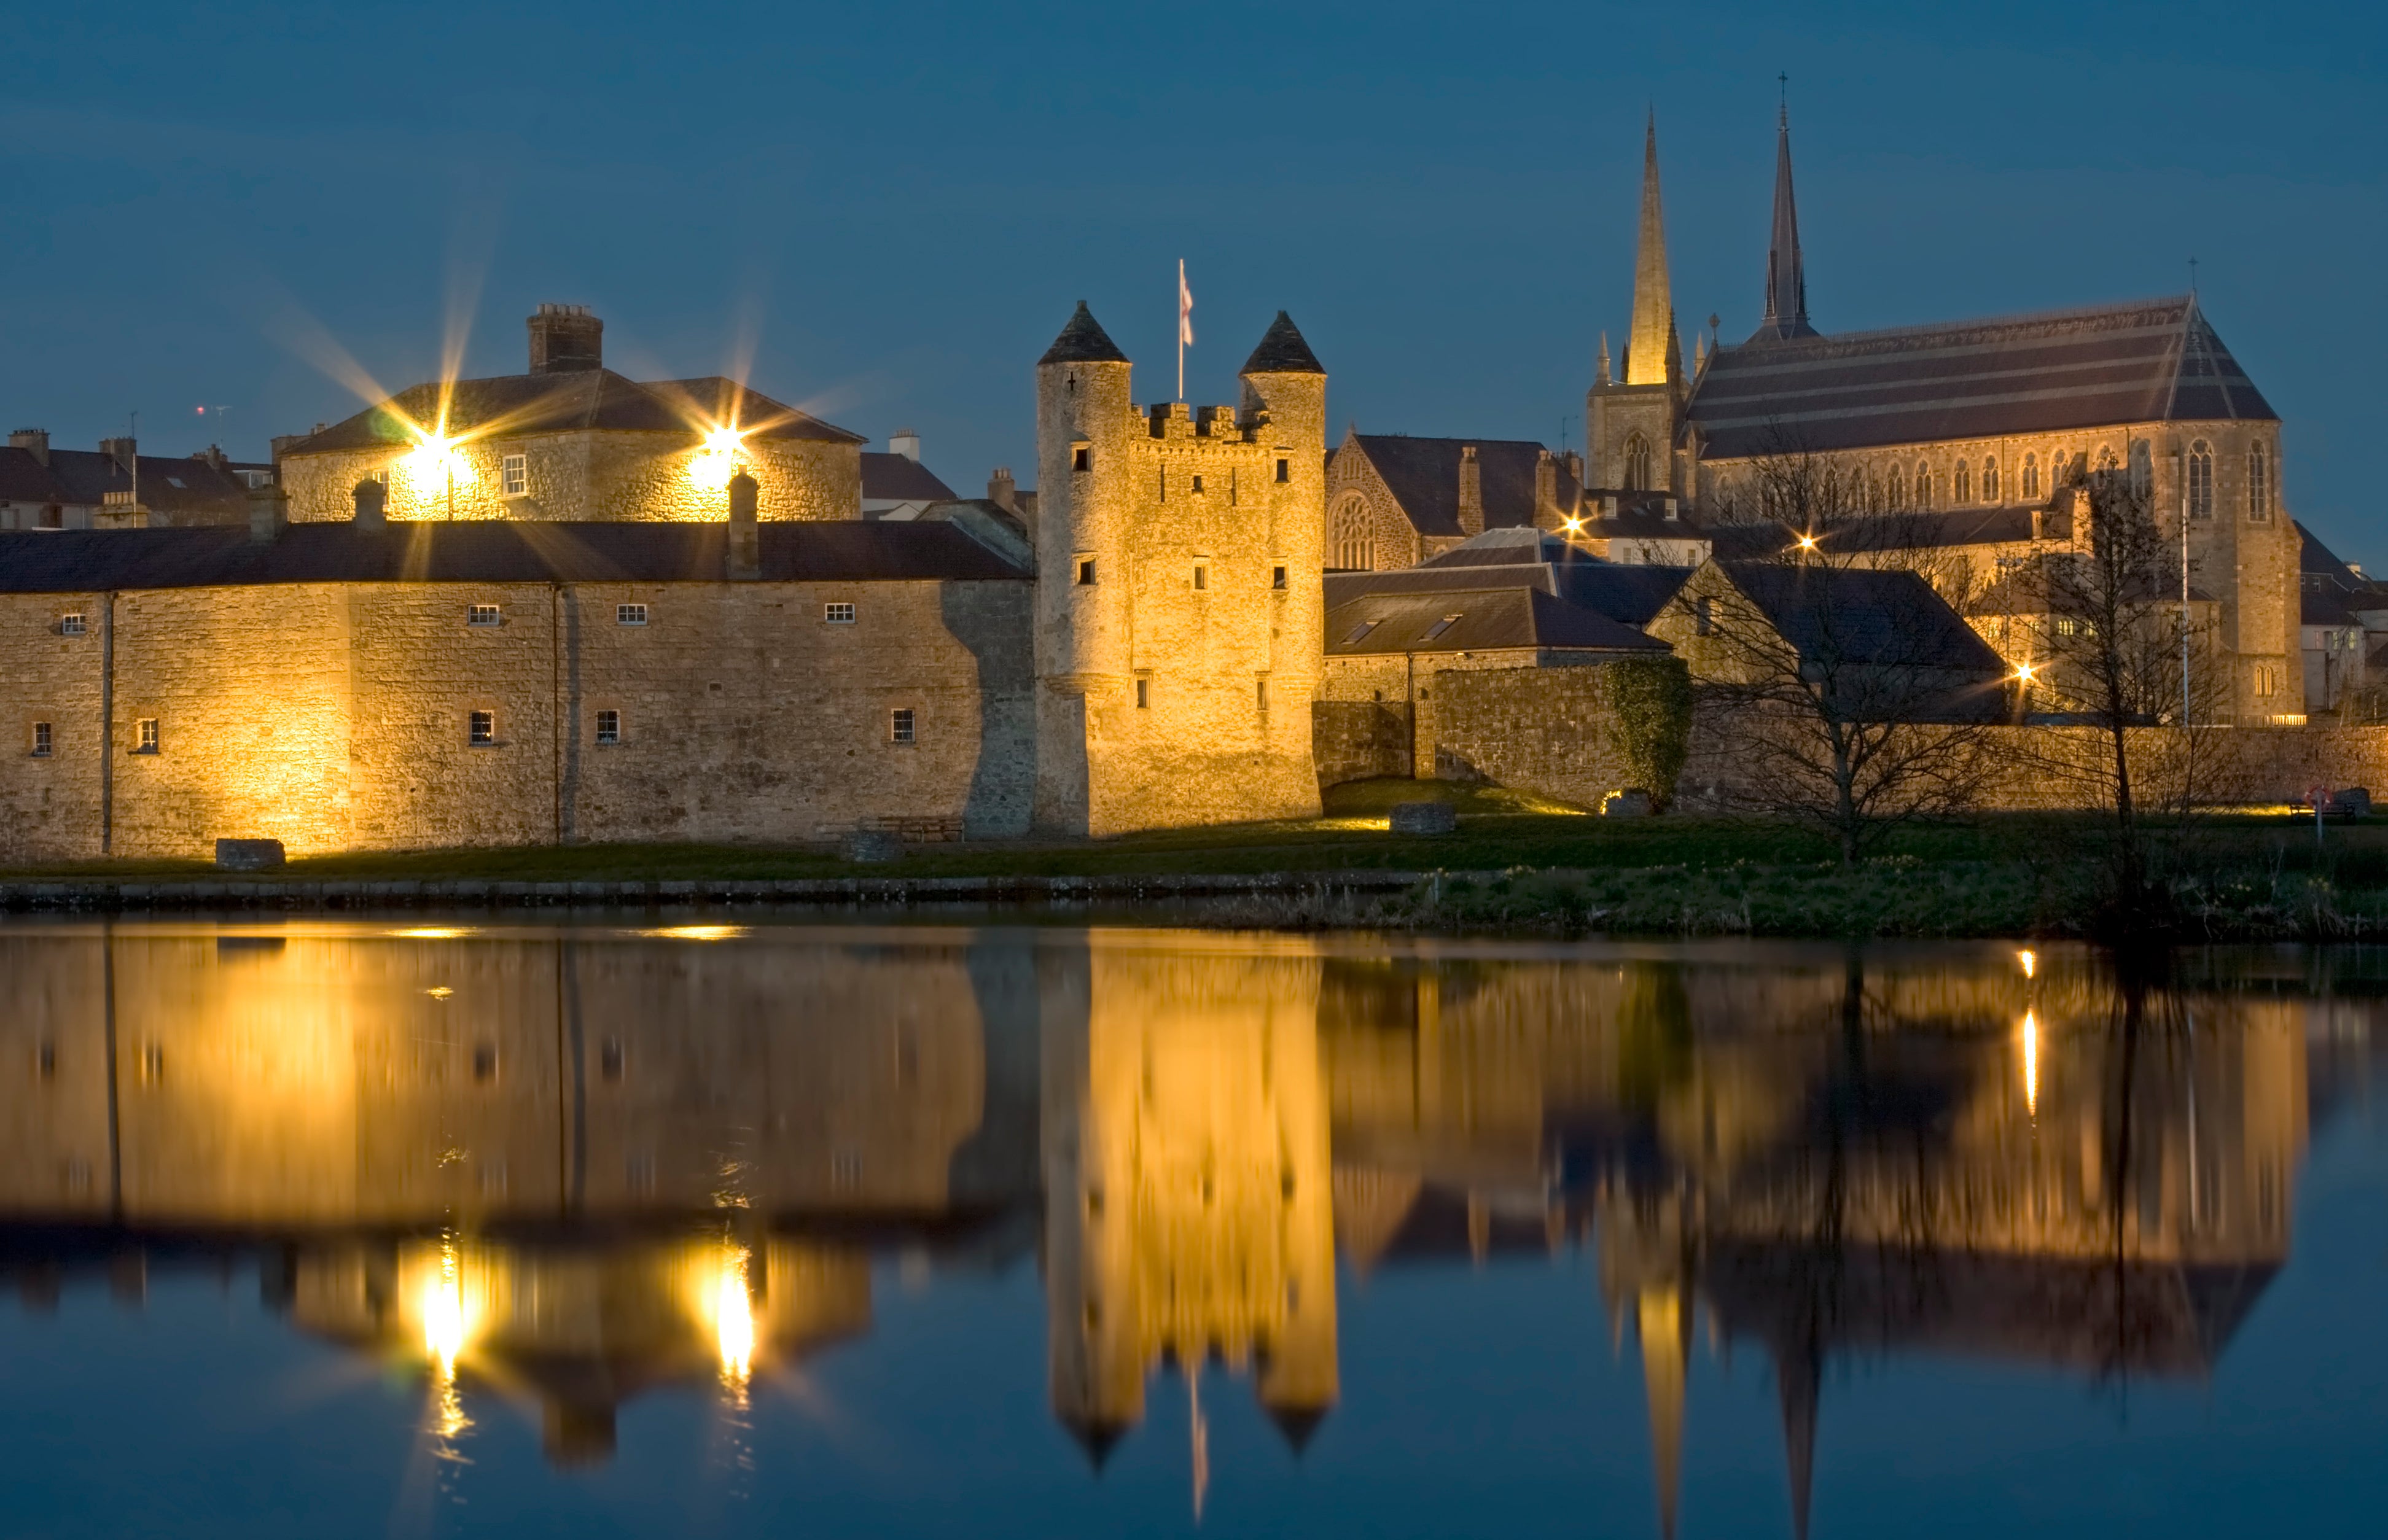 Enniskillen, County Fermanagh topped a poll for the friendliest town in the UK in 2022